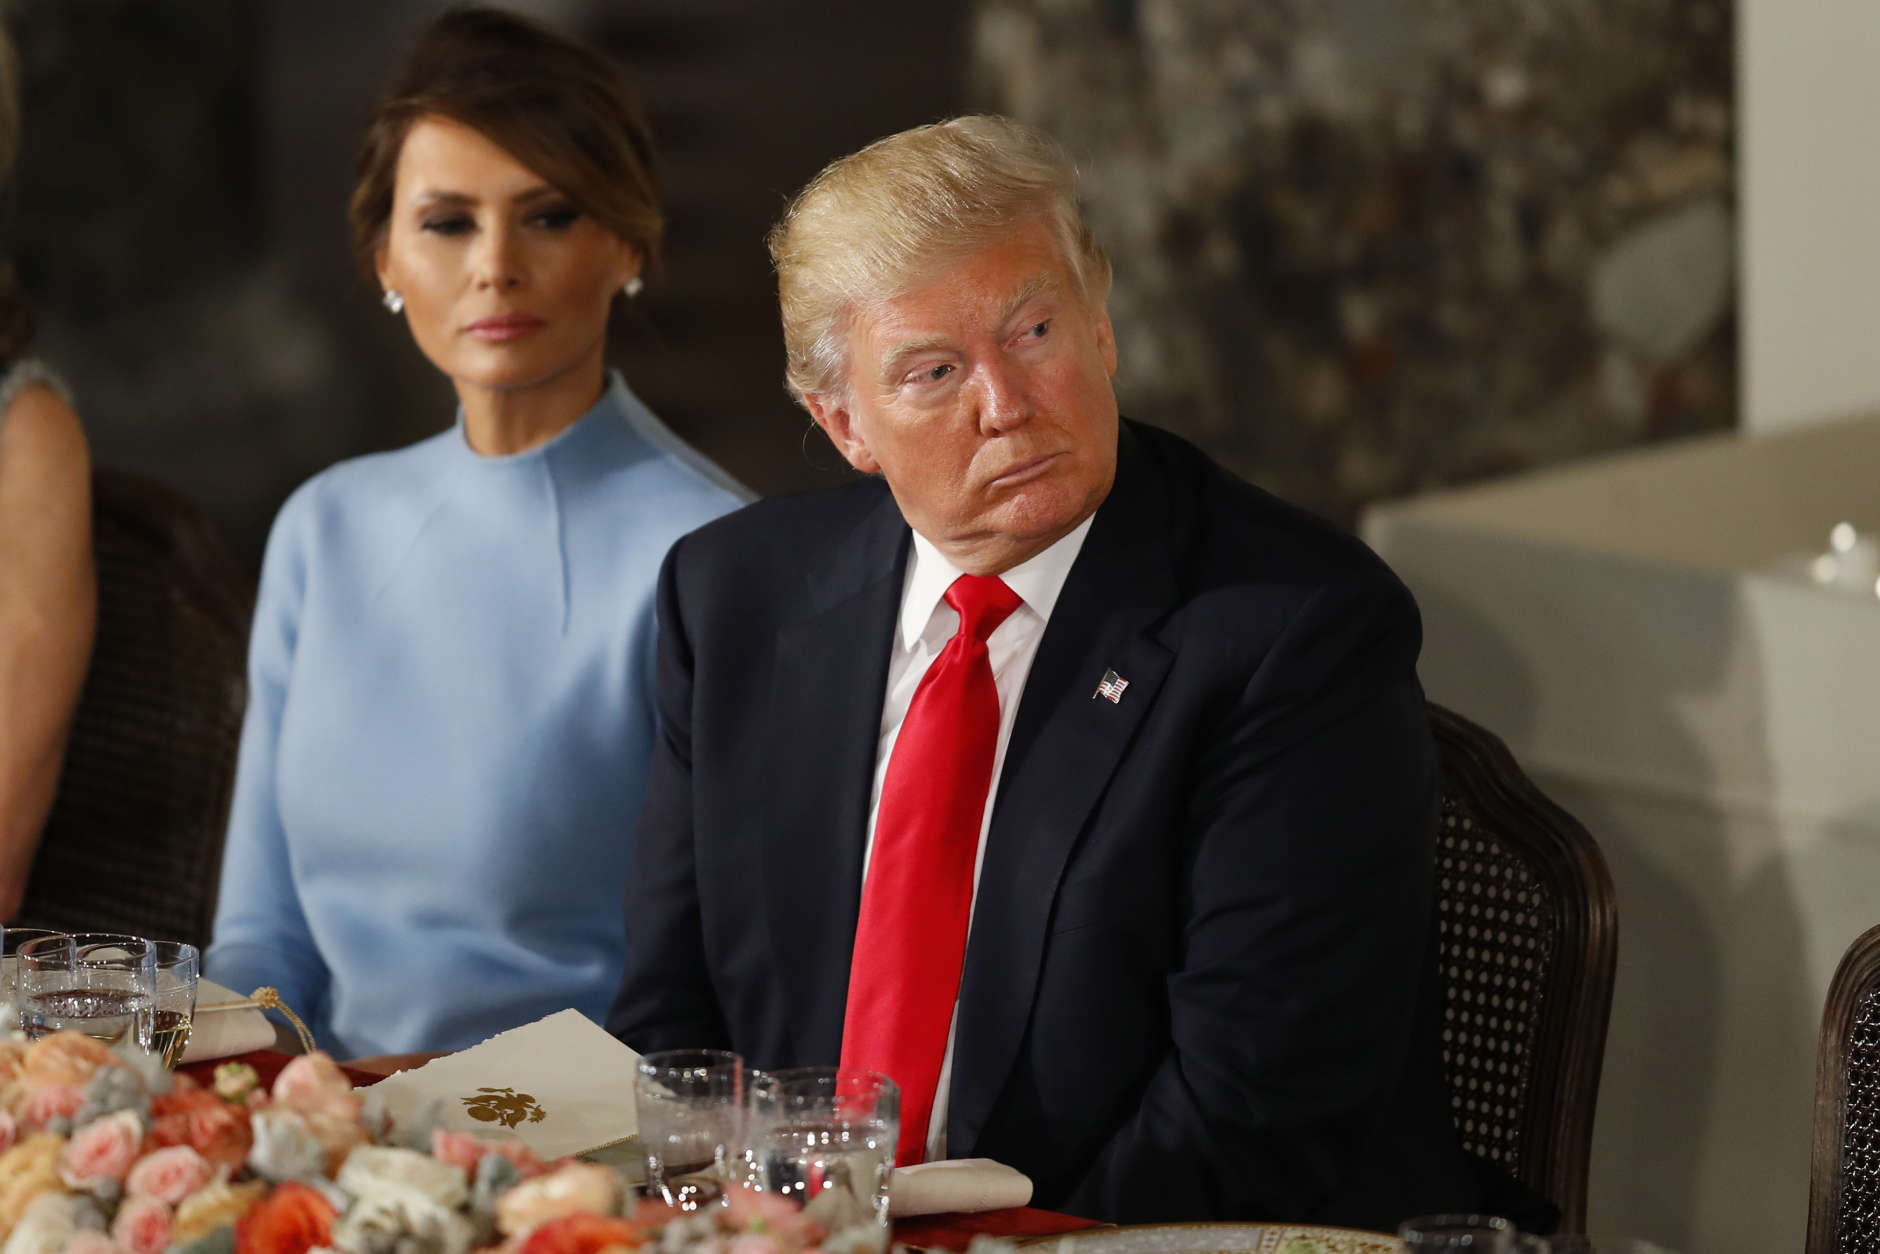 WASHINGTON, DC - JANUARY 20:  President Donald Trump and first lady Melania Trump attend the Inaugural Luncheon in the US Capitol January 20, 2017 in Washington, DC. President Trump is attending the luncheon along with other dignitaries after being sworn in as the 45th President of the United States. (Photo by Aaron P. Bernstein/Getty Images)